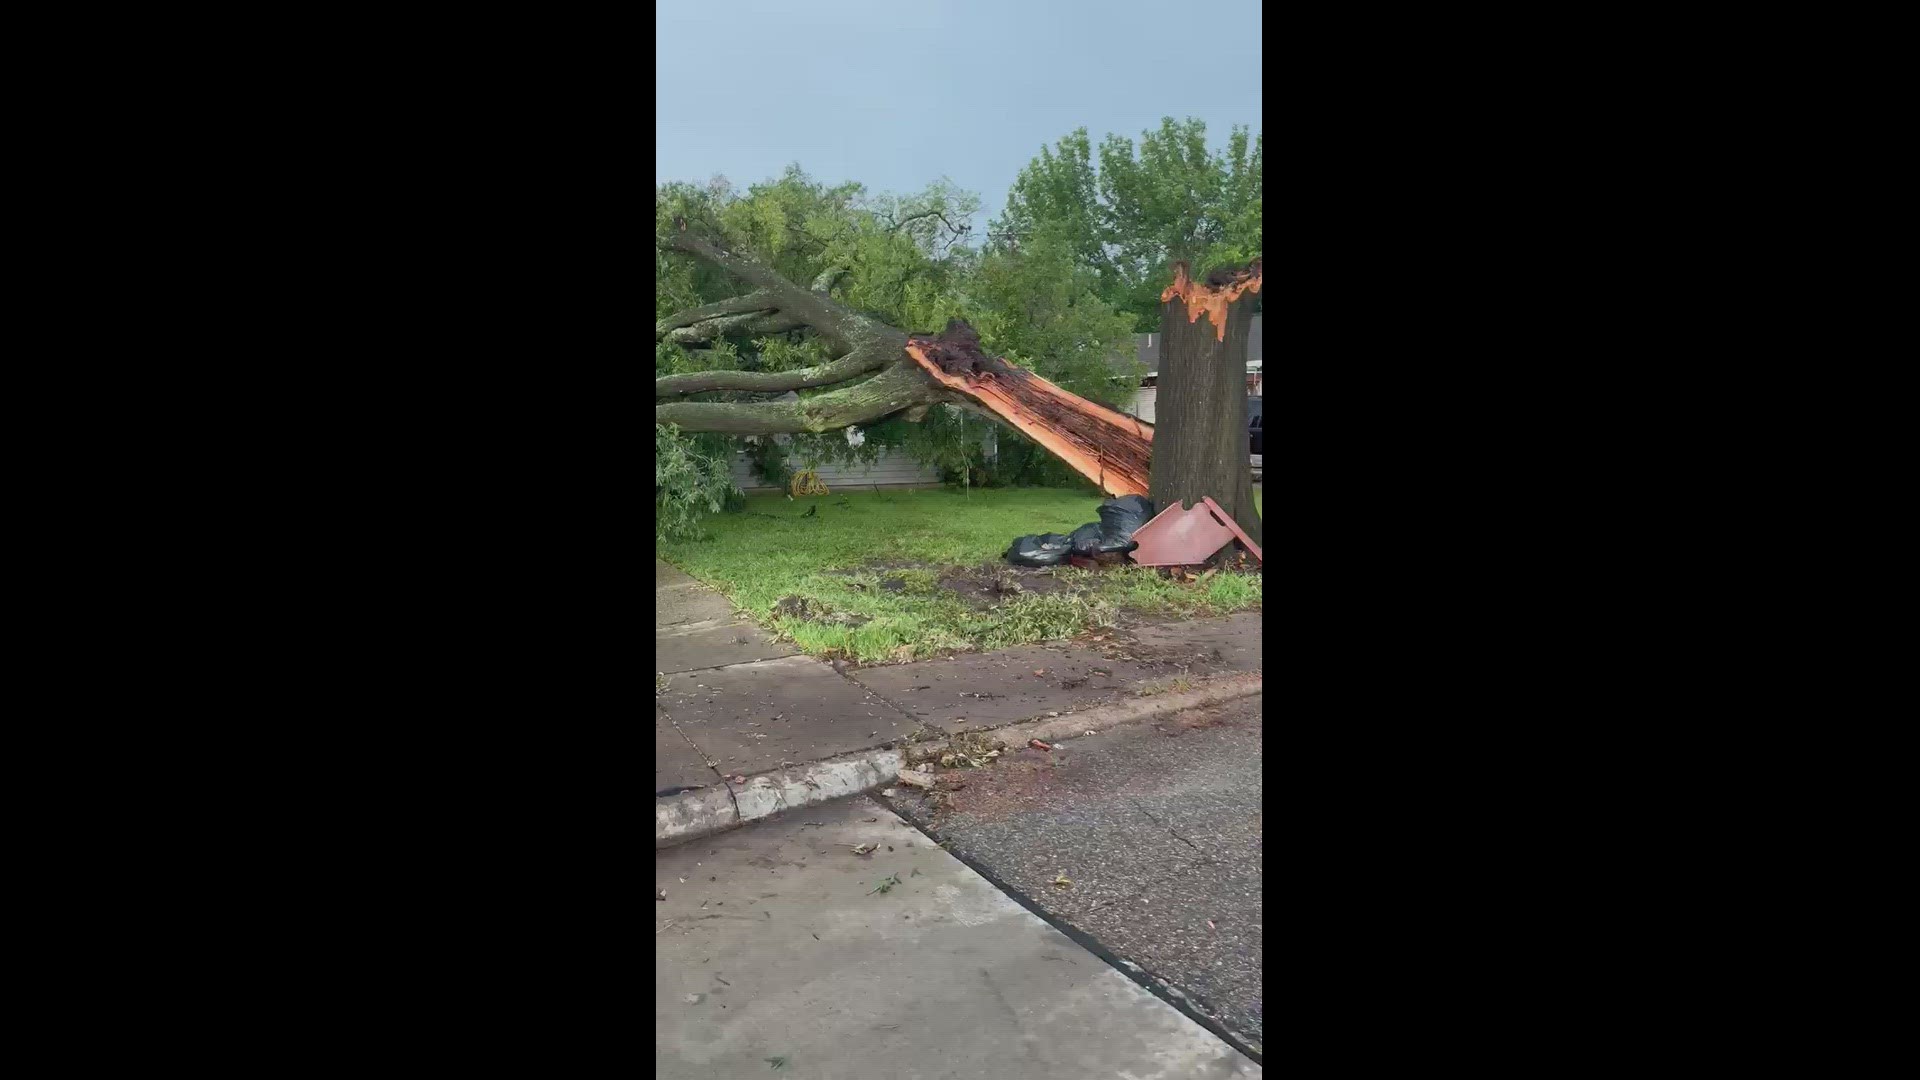 Raul Sifuentes Jr. sent us this video from Pasadena. The tree toppled during Thursday's severe storms.